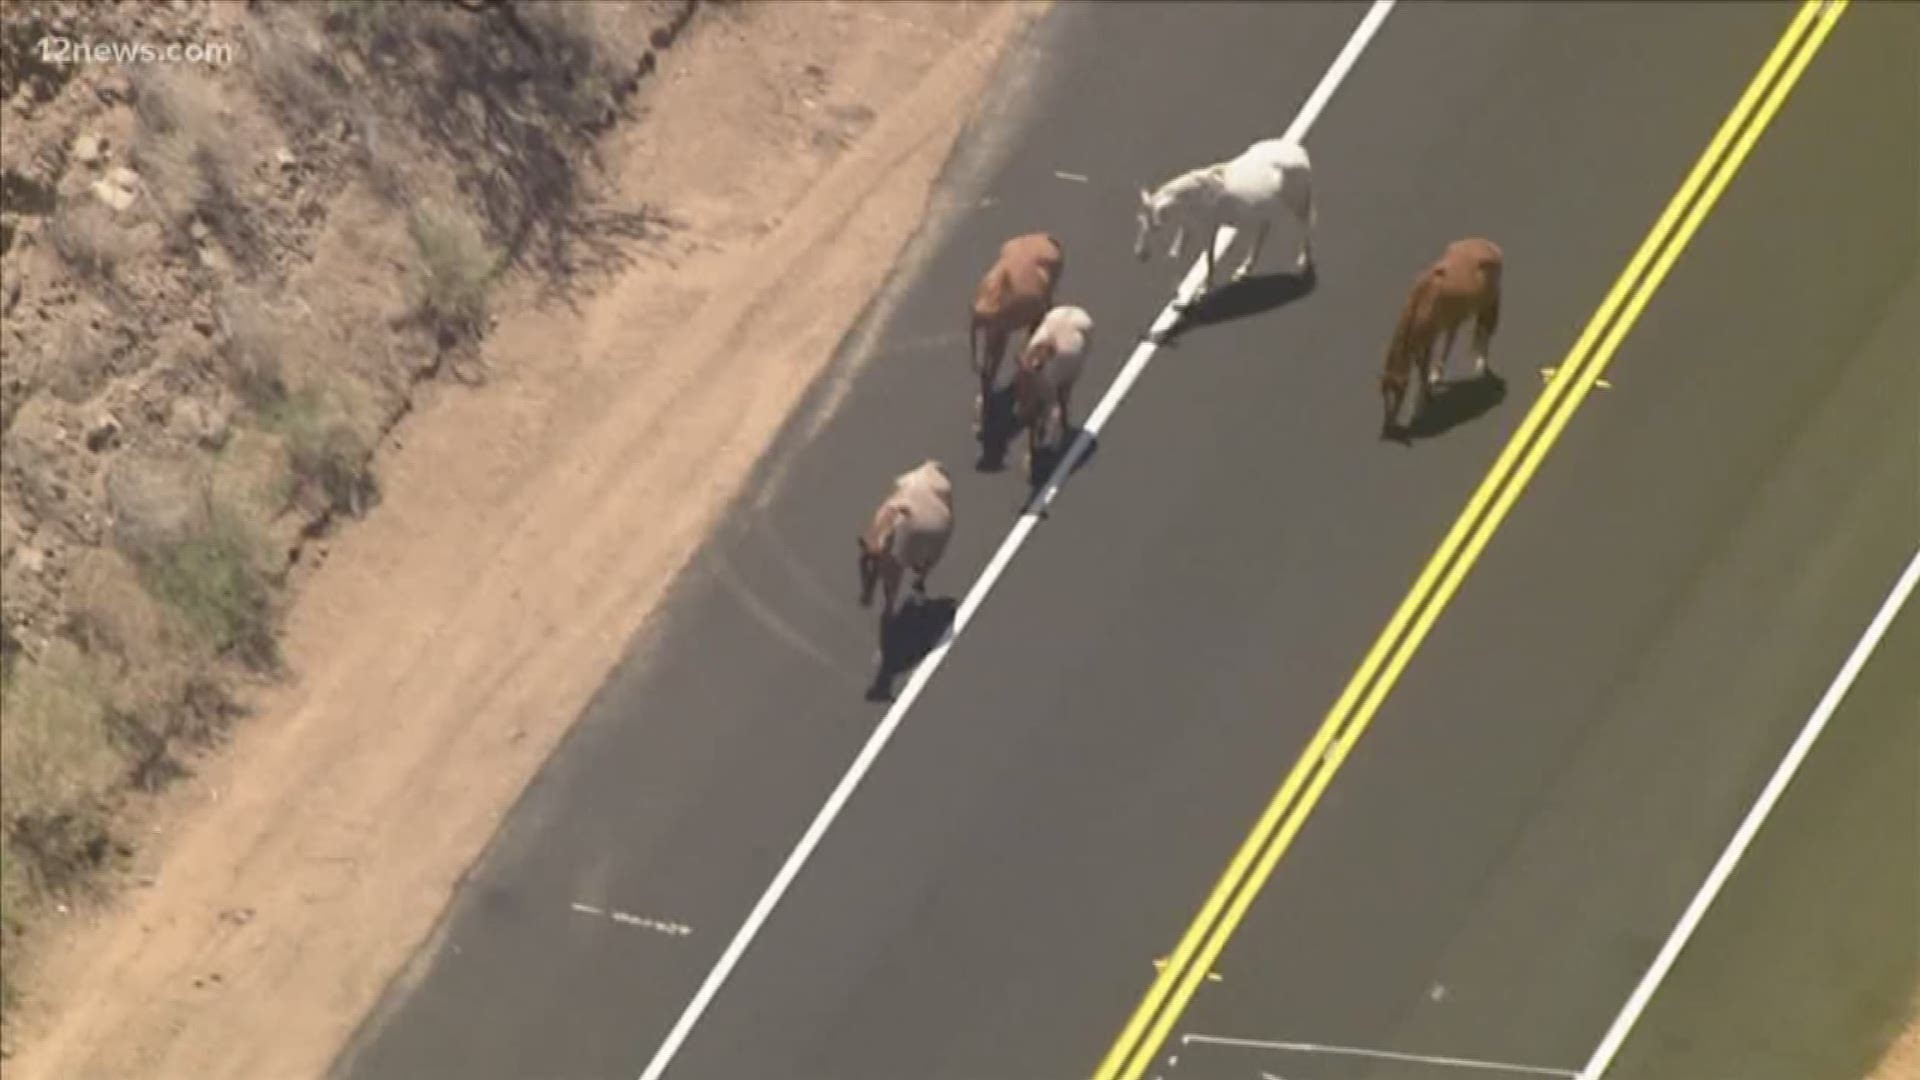 A group advocating for wild horses and the Maricopa County Department of Transportation are working together to make roads safe for drivers and horses.